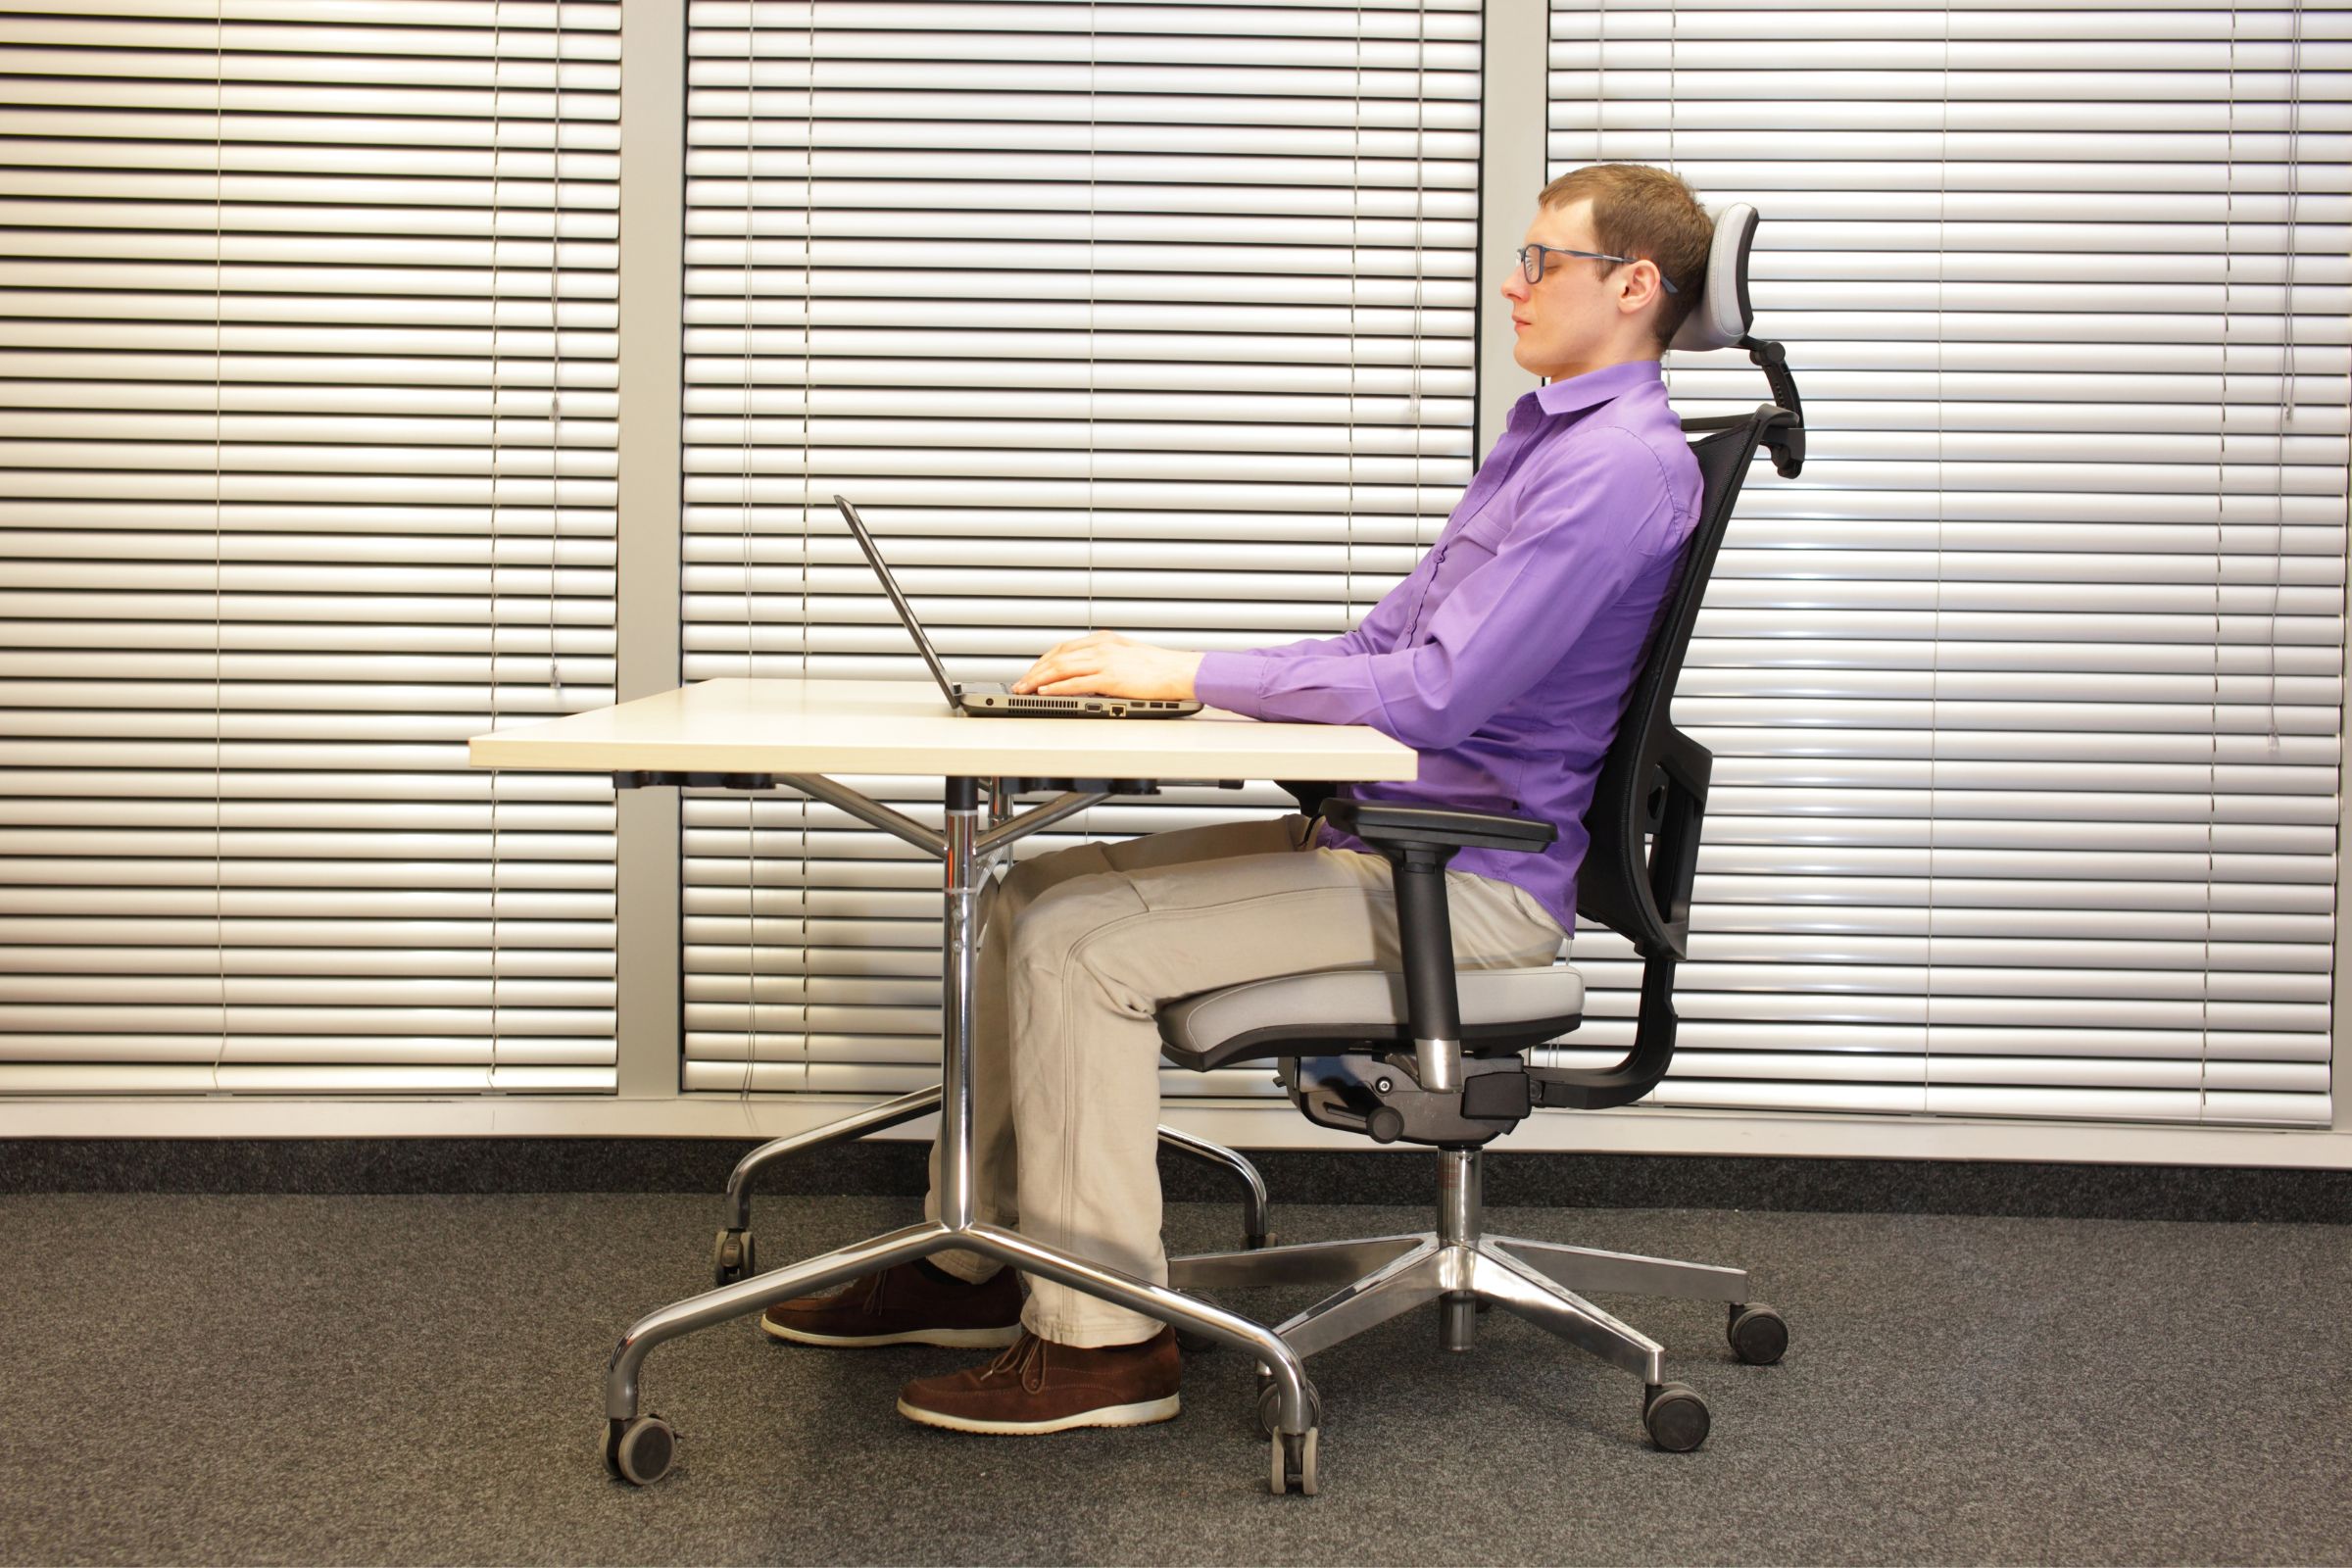 Ergonomic Chairs for Different Body Types: Finding the Perfect Fit for Every Individual